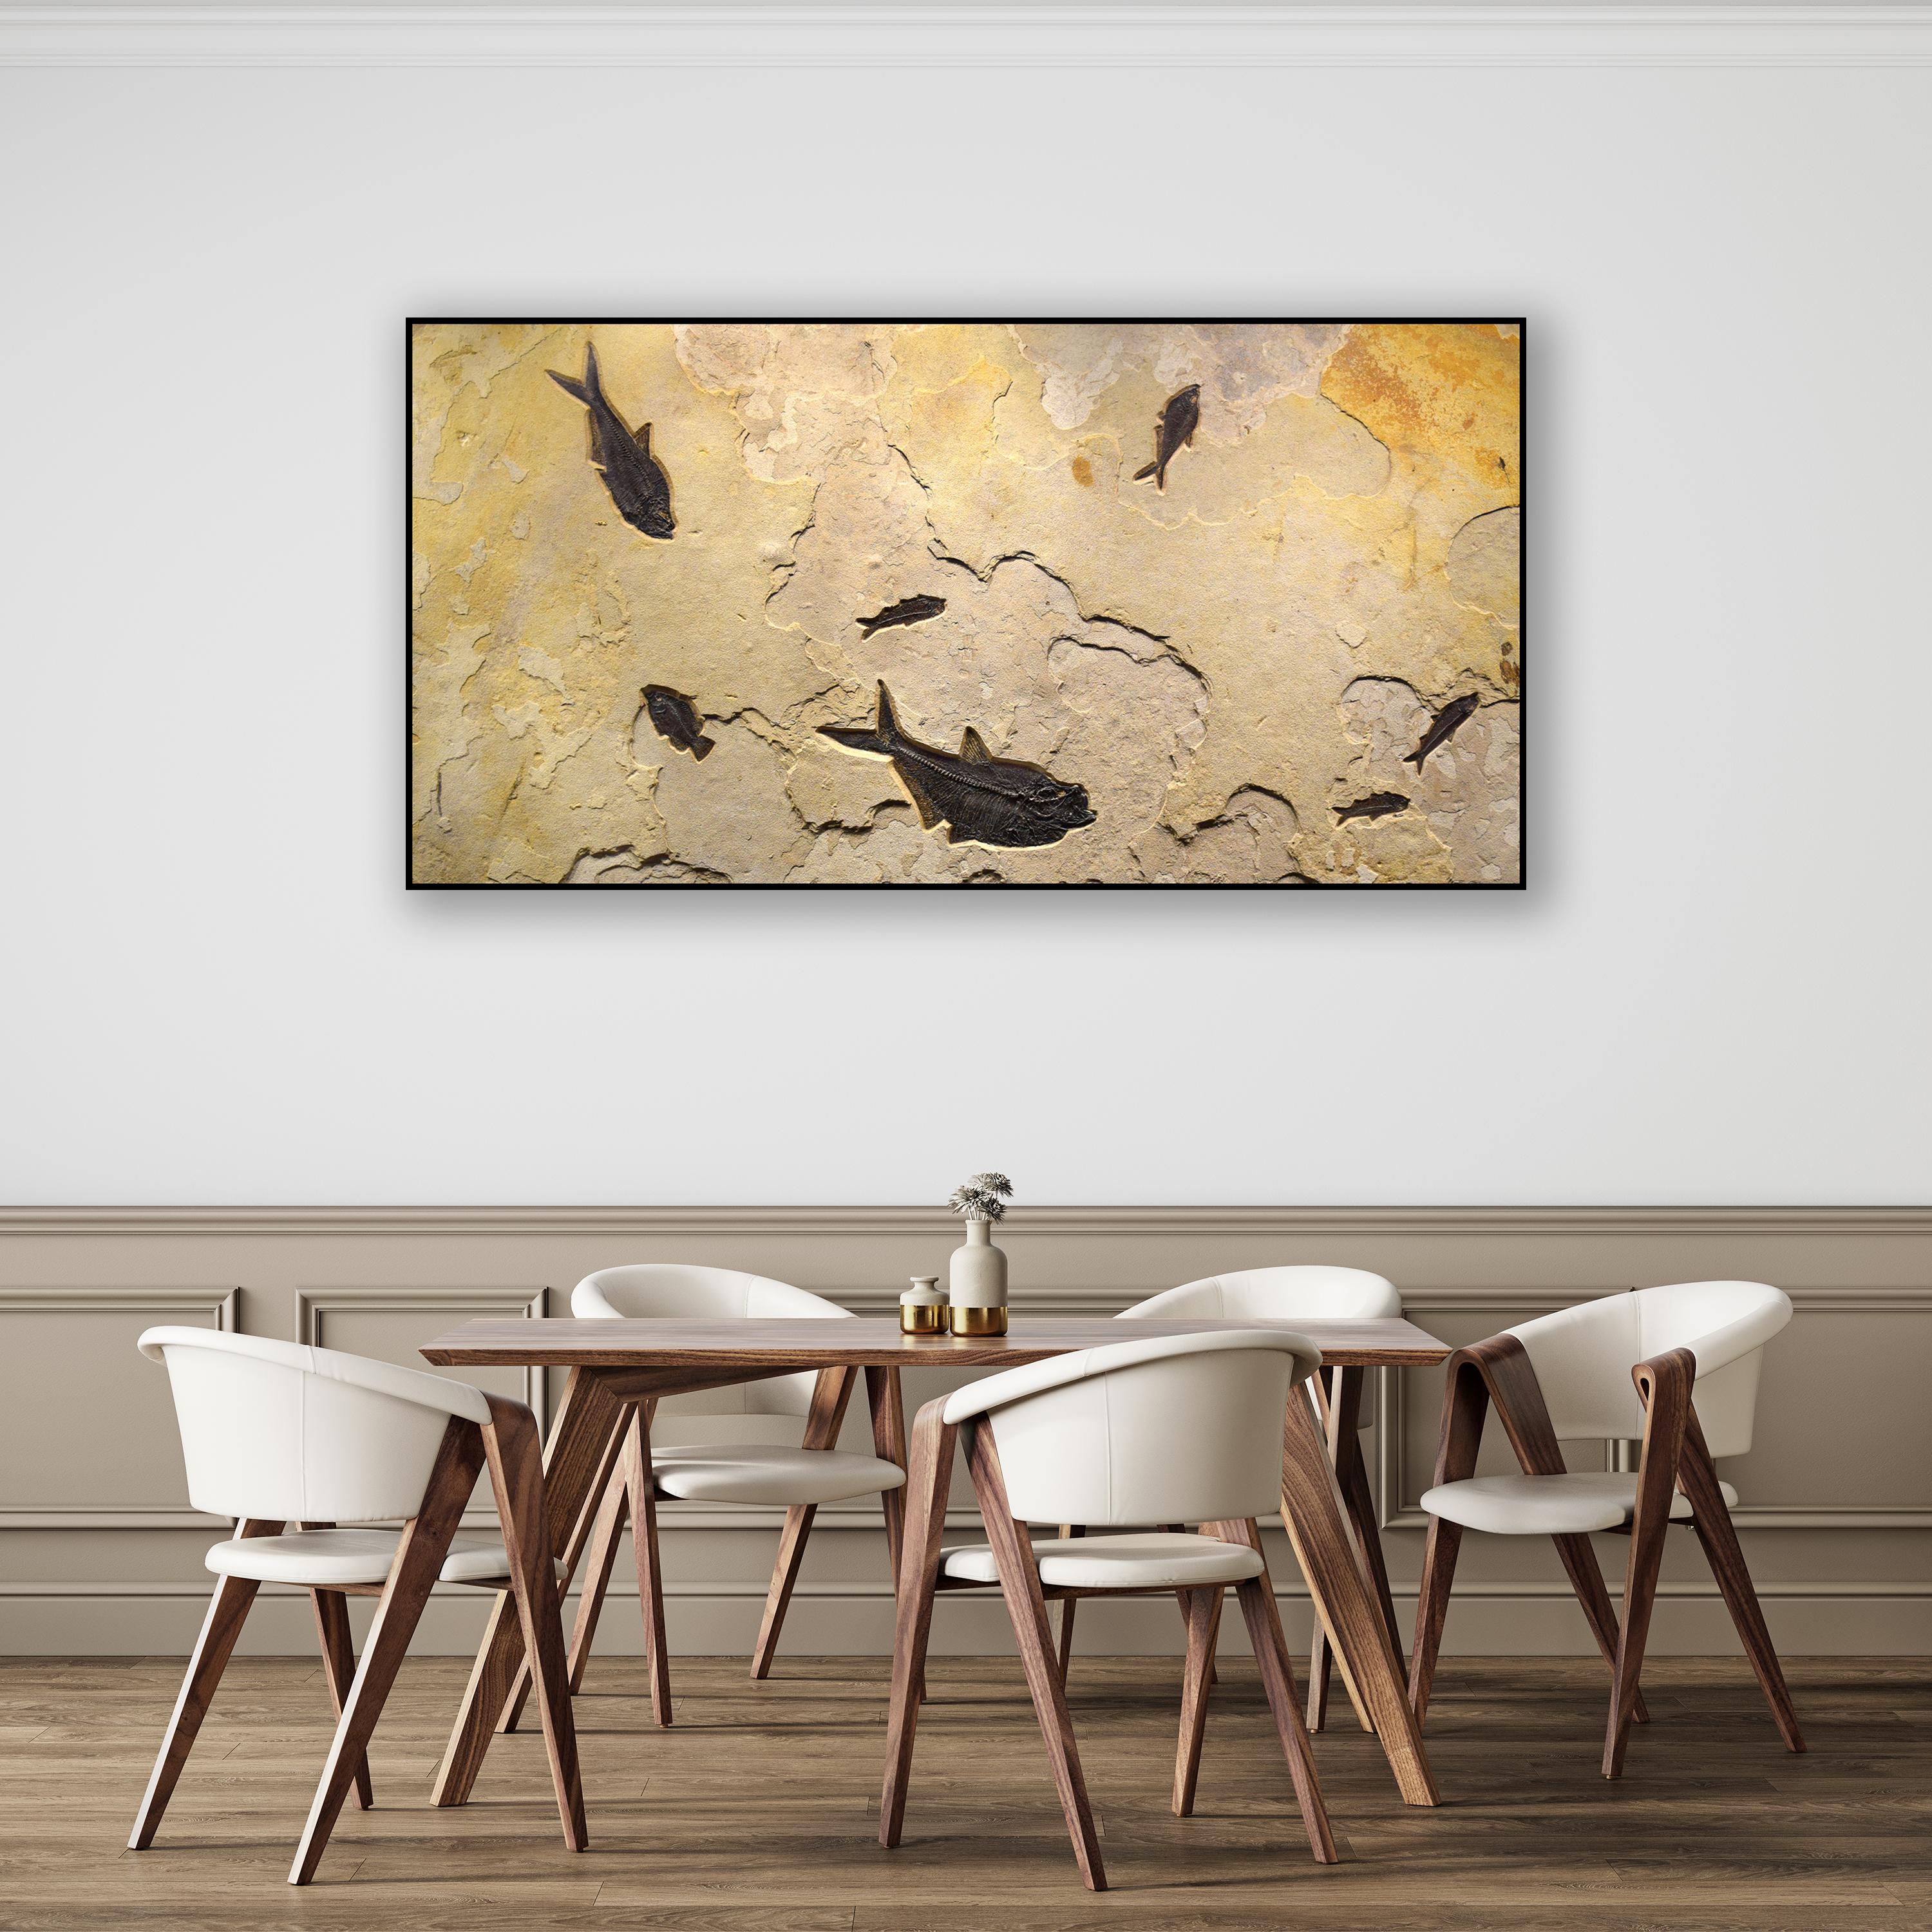 This exquisite and unique fossil mural features three Diplomystus dentatus, a Cockerellites liops (formerly known as Priscacara), and three Knightia eocaena. These fish are all Eocene era fossils dating back about 50 million years. These ancient